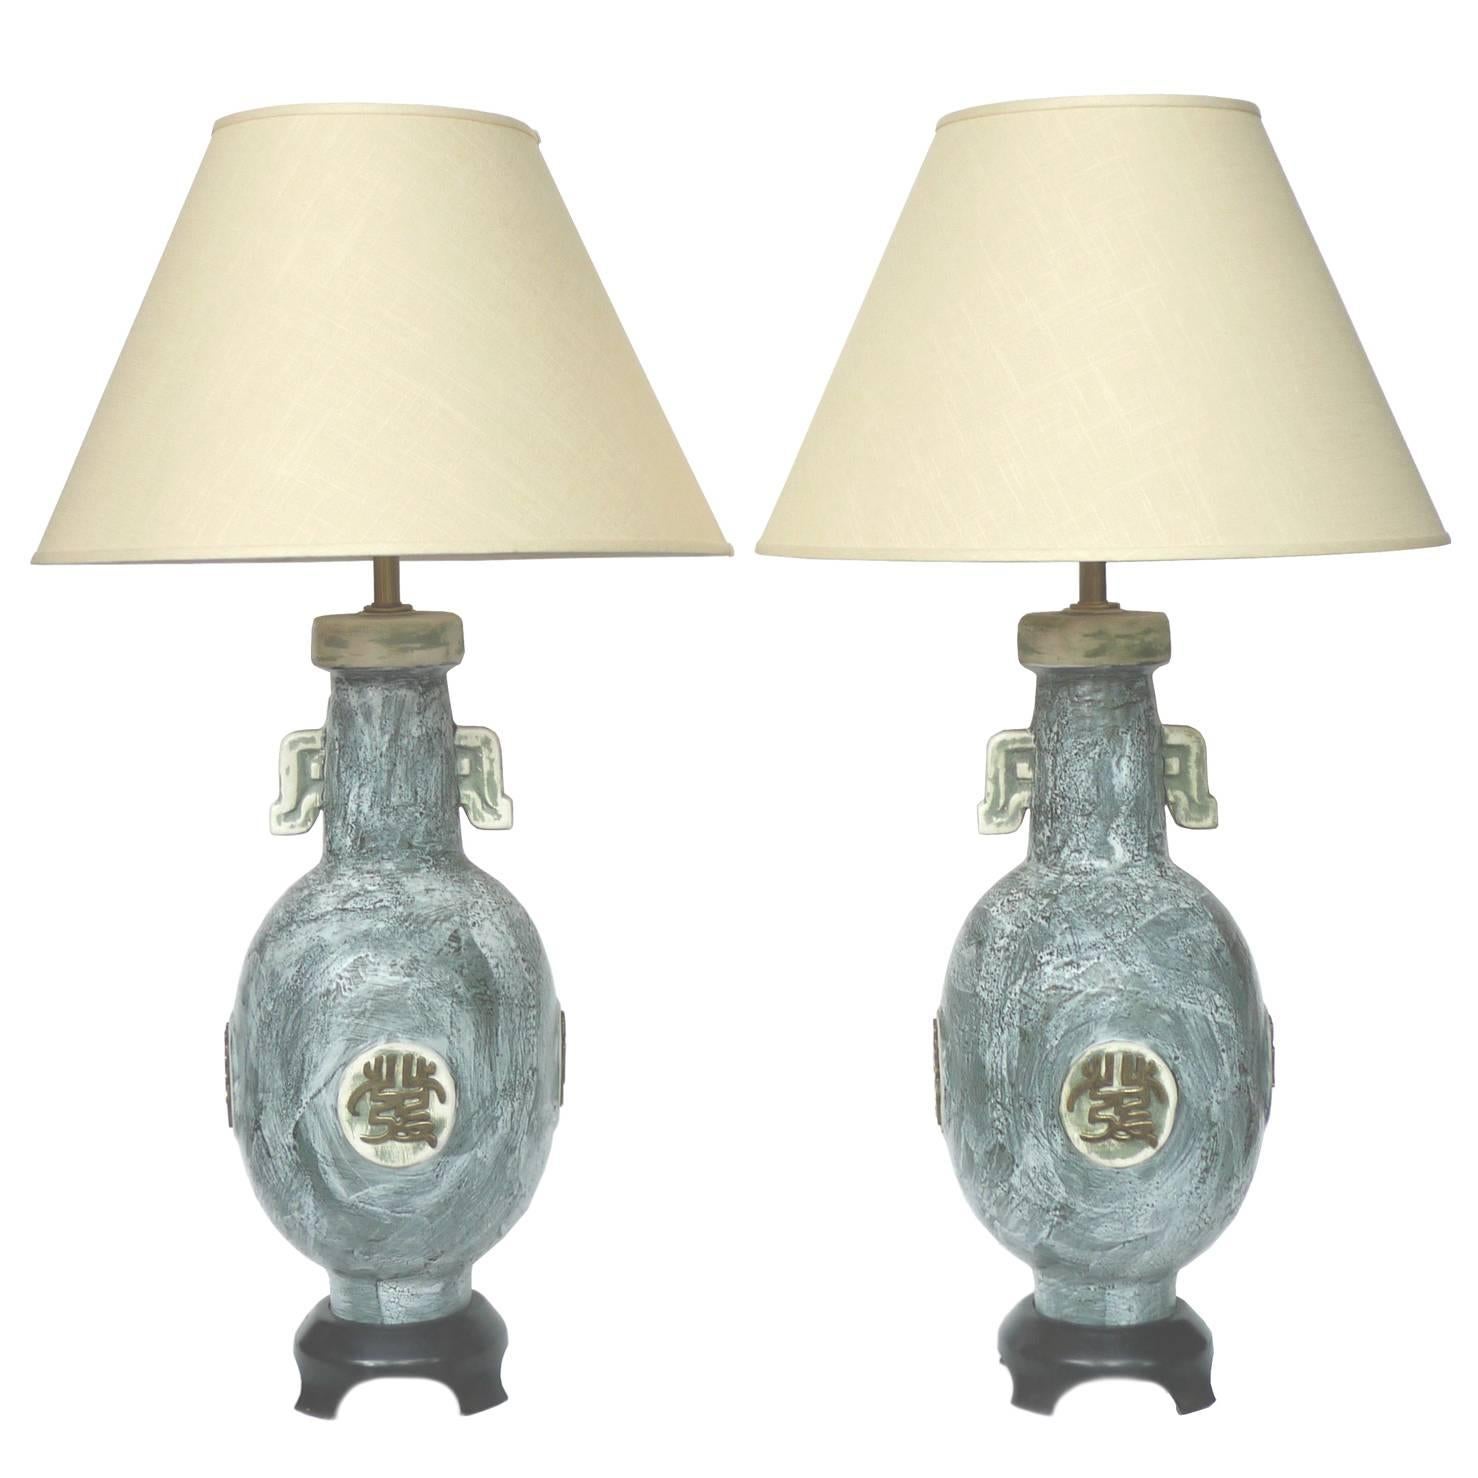 1970s Ceramic Table Lamps by Marbro, Pair For Sale